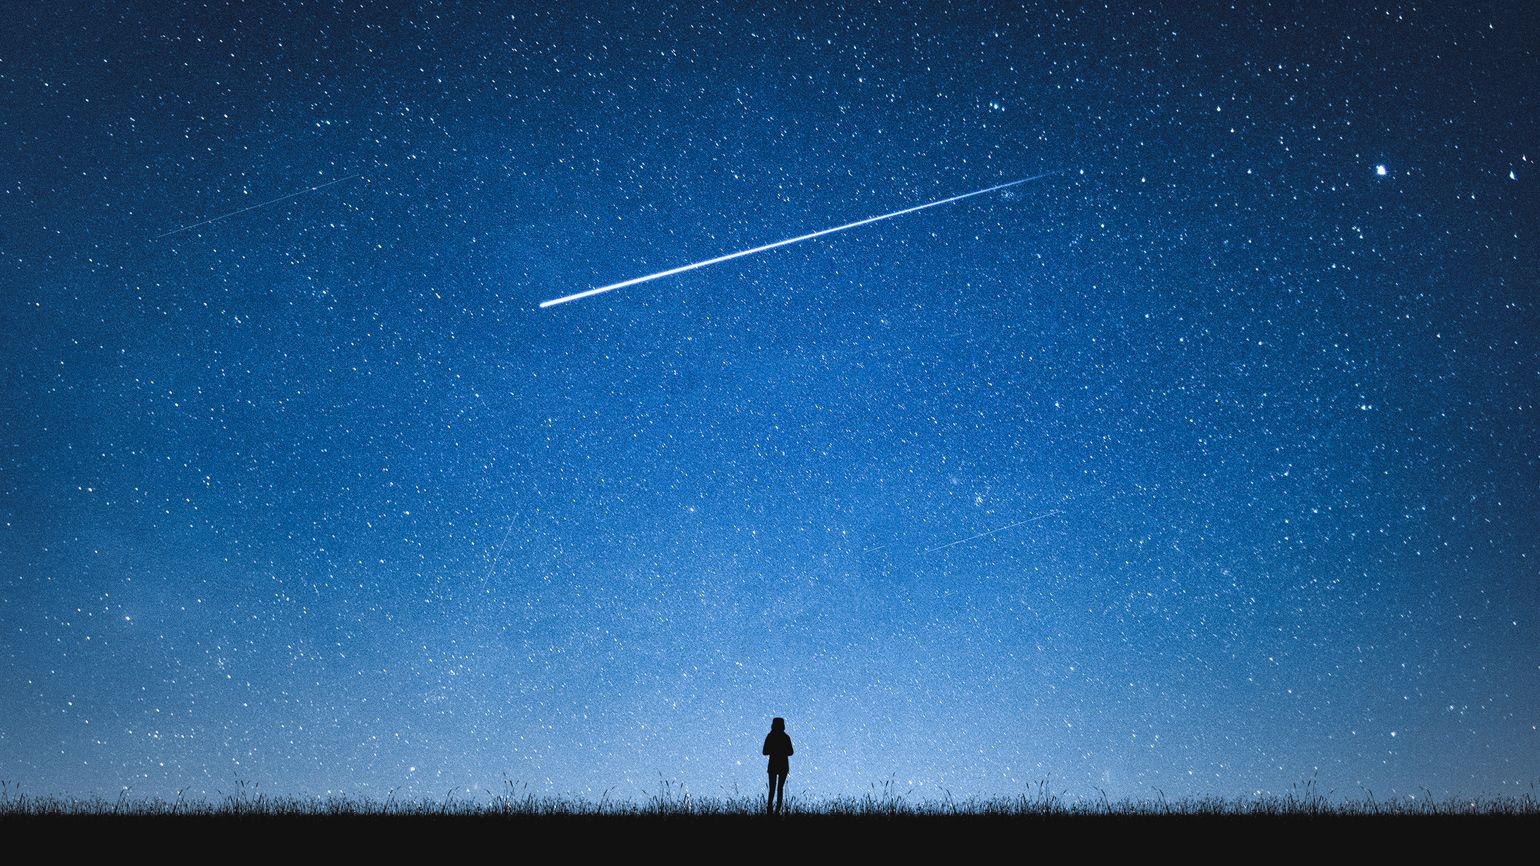 A silouette of a girl observing the night sky with a shooting star.